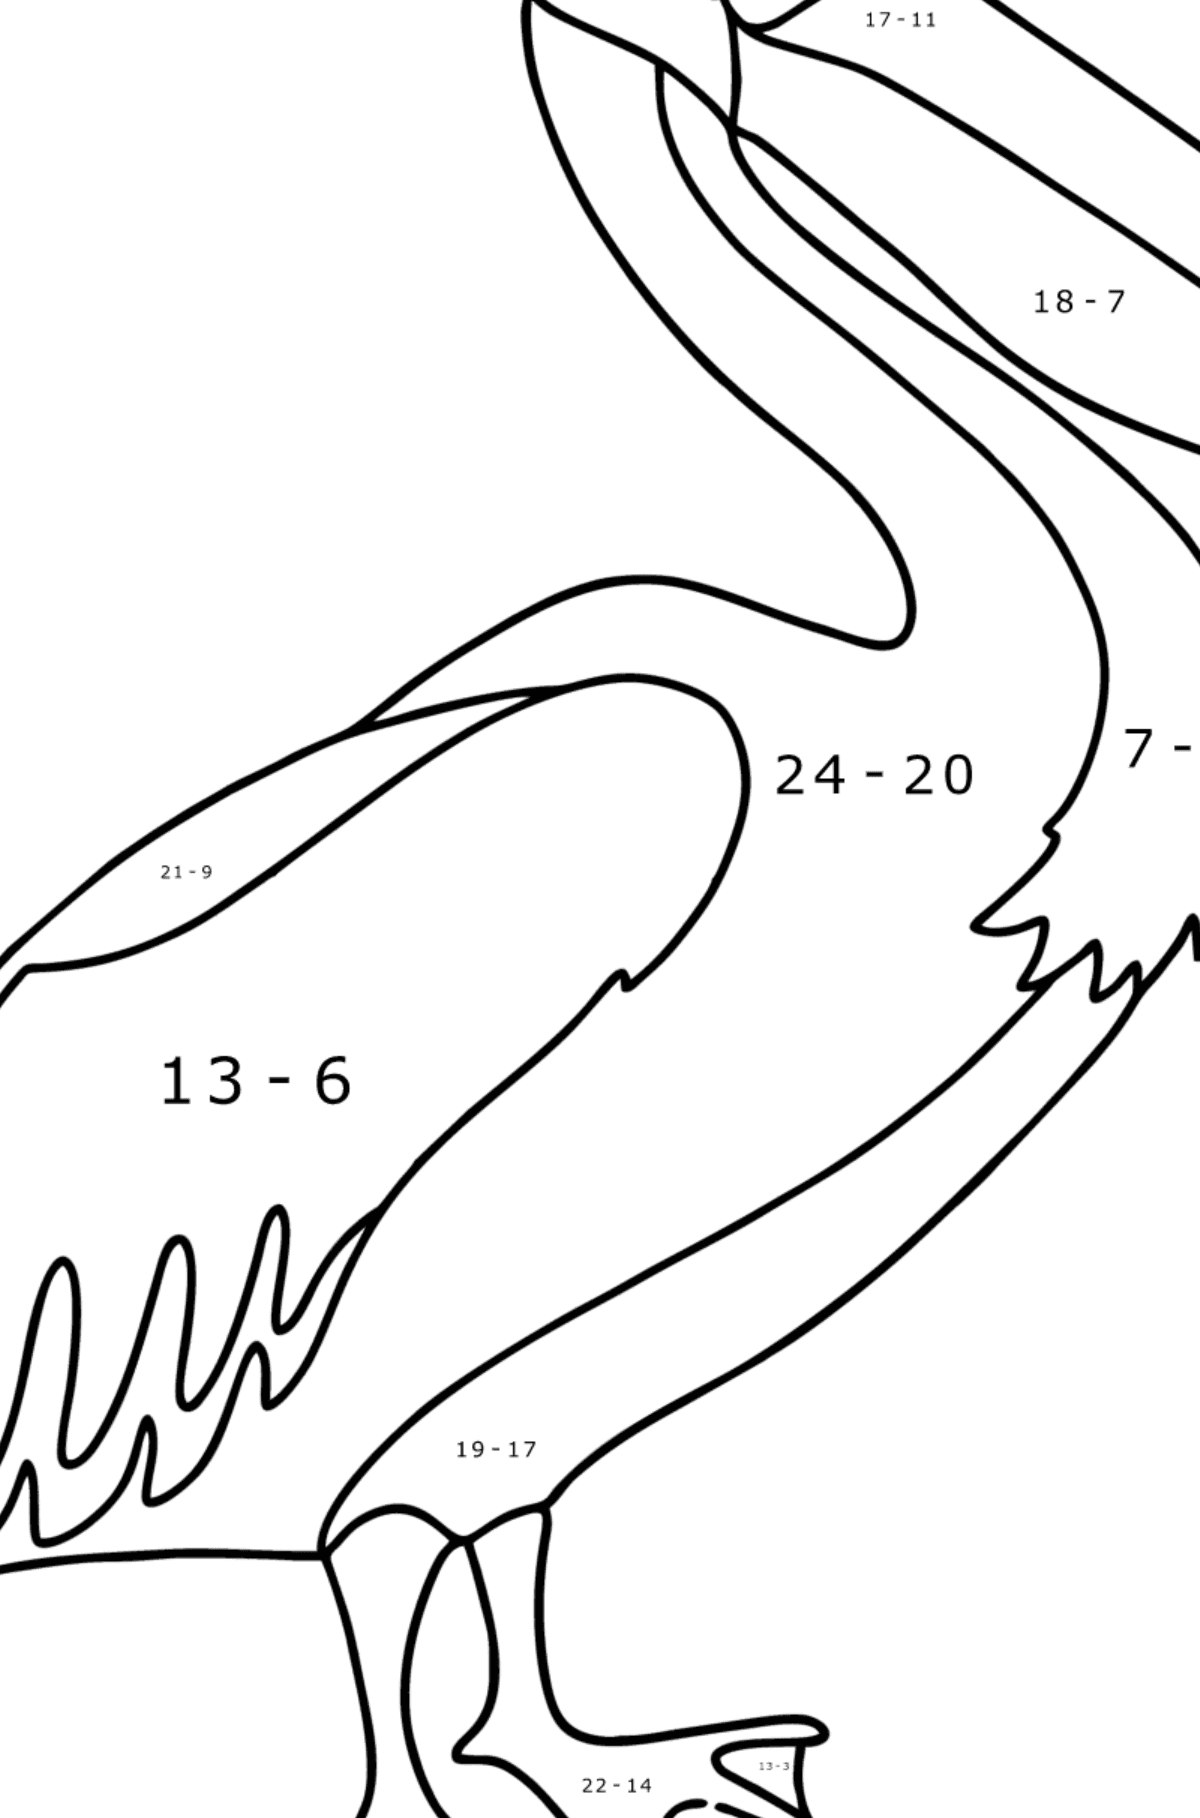 Pelican сoloring page - Math Coloring - Subtraction for Kids